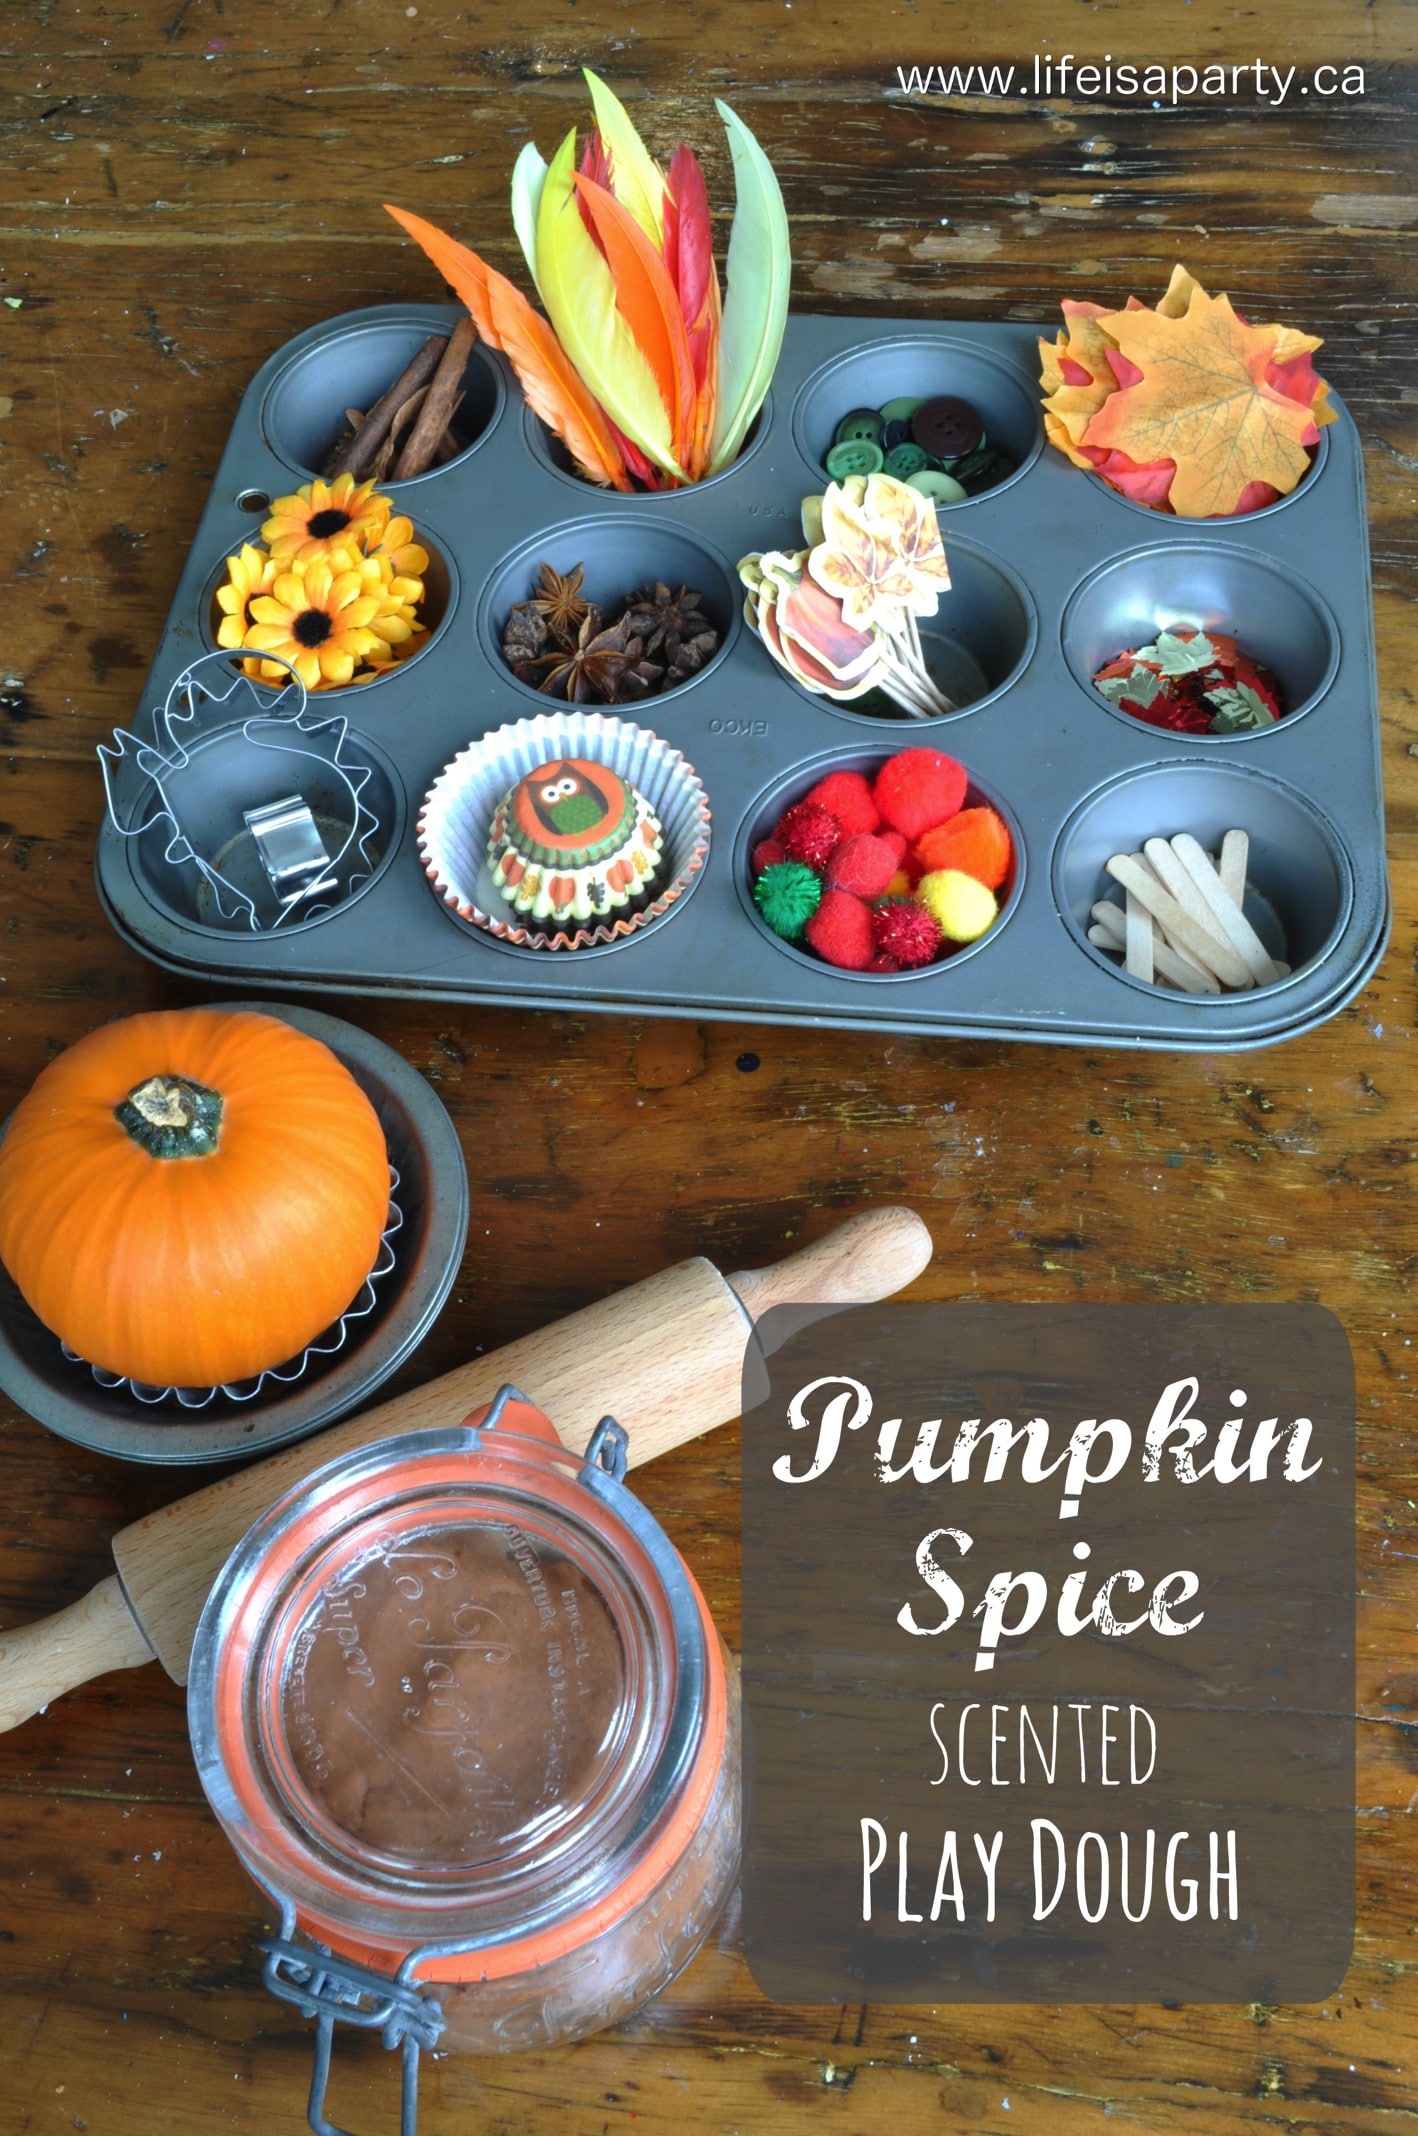 Pumpkin Spice Play Dough: Great recipe for pumpkin pie scented play dough. Lots of ideas for a fun fall sensory centre for children.